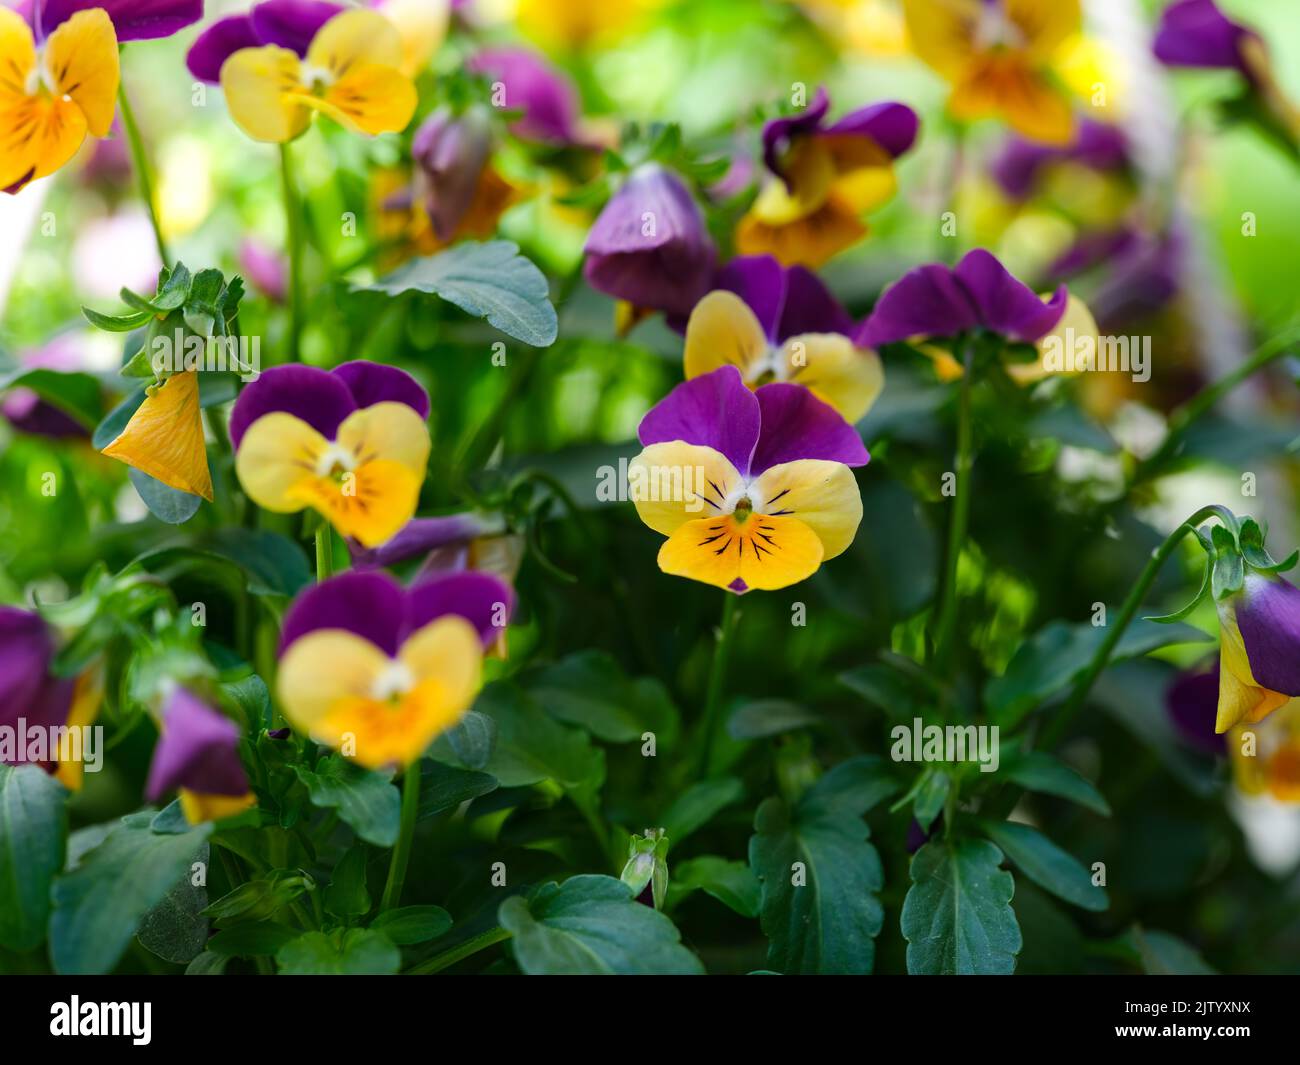 Yellow and violet pansies flowering in the garden Stock Photo